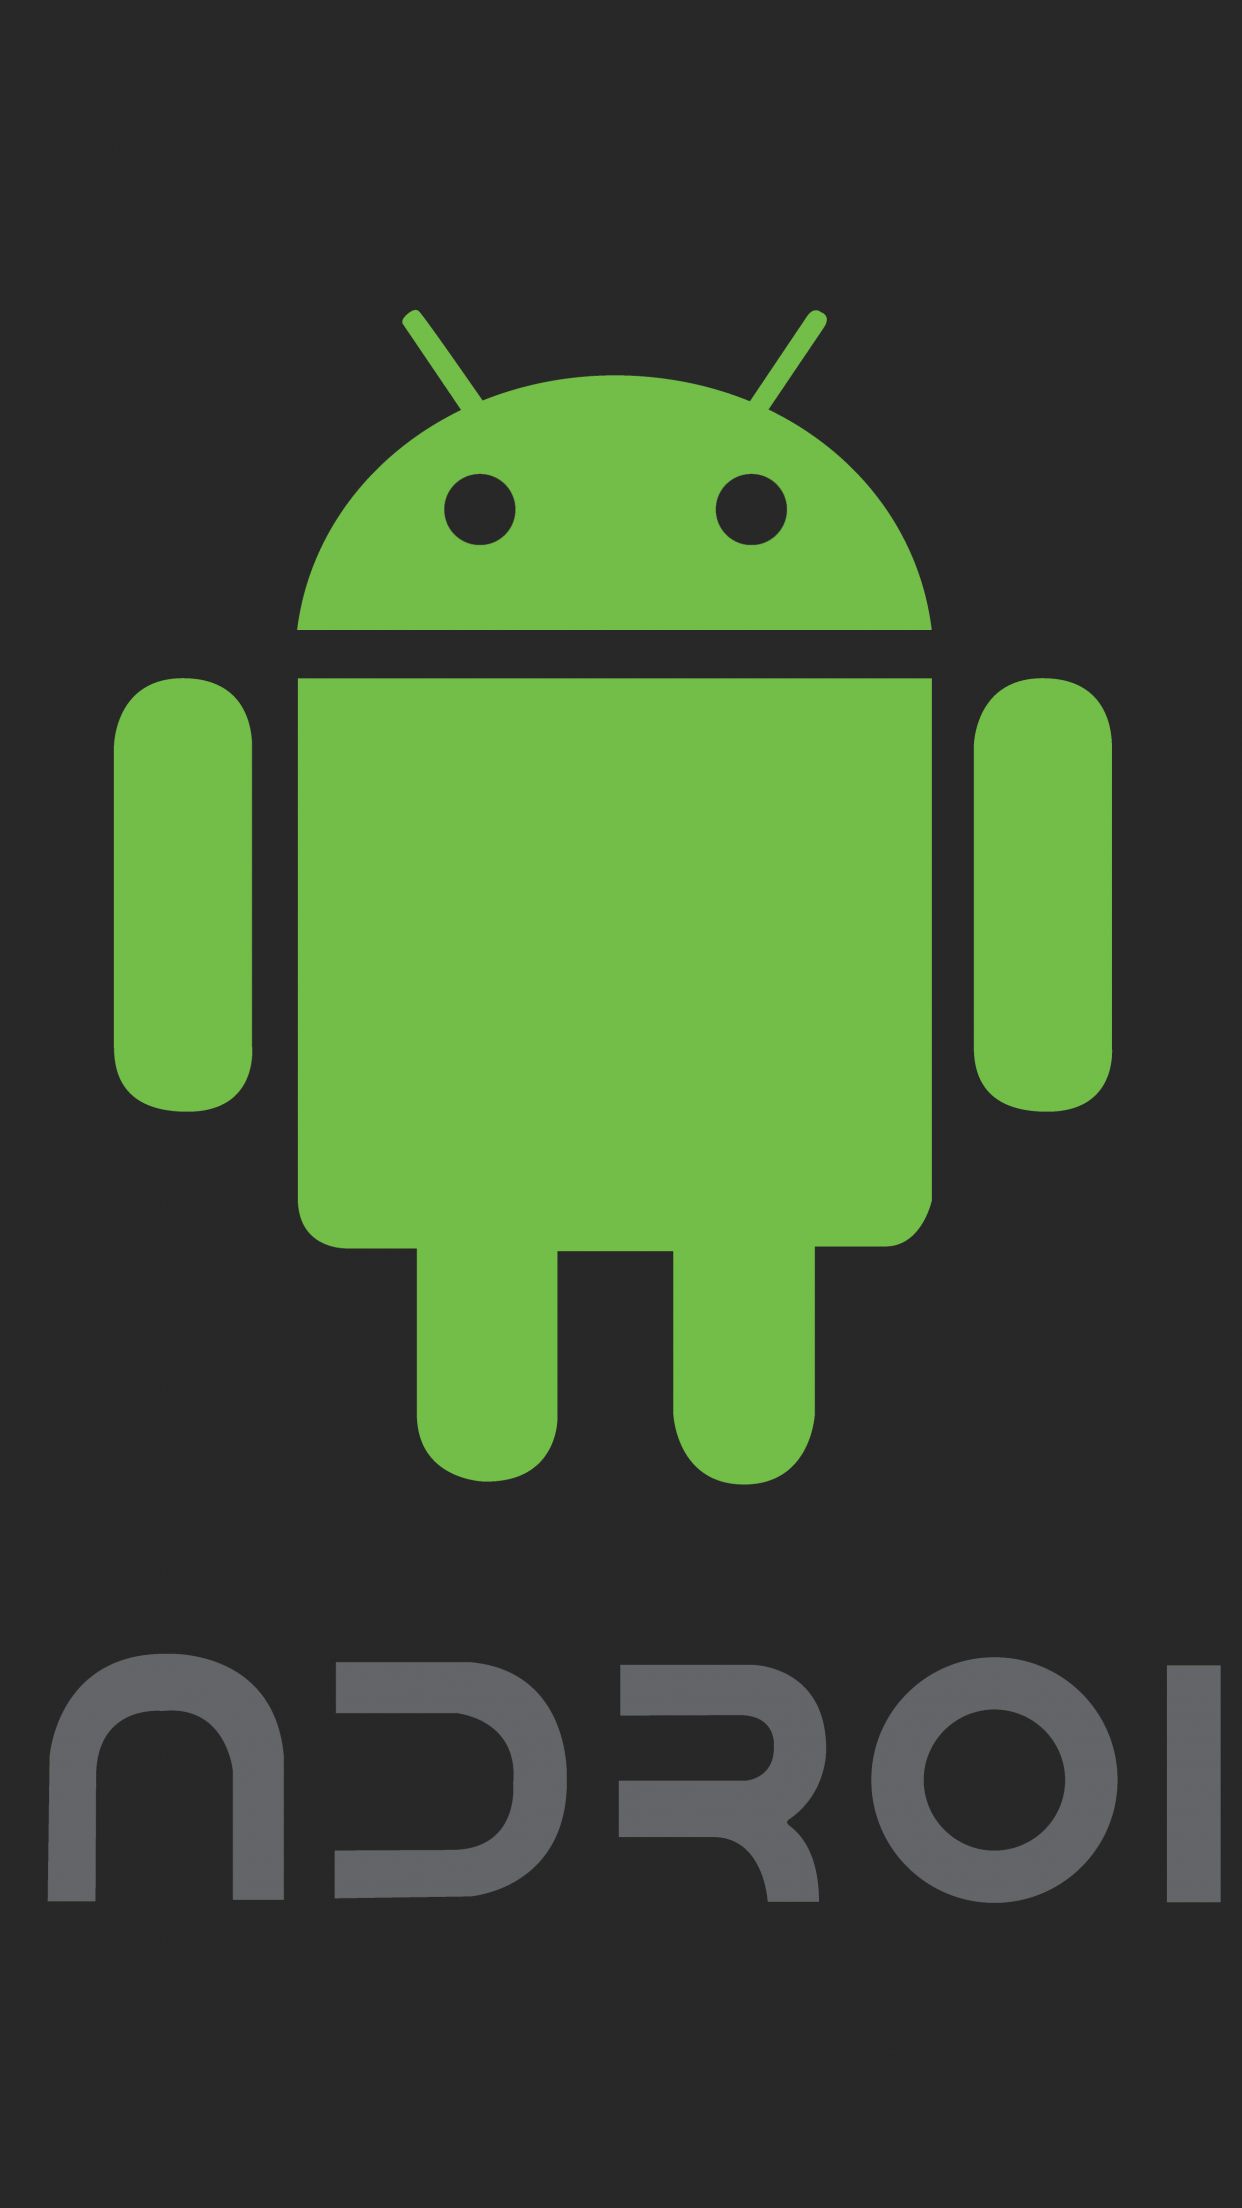 Android logo wallpaper for iPhone and Android. - Android